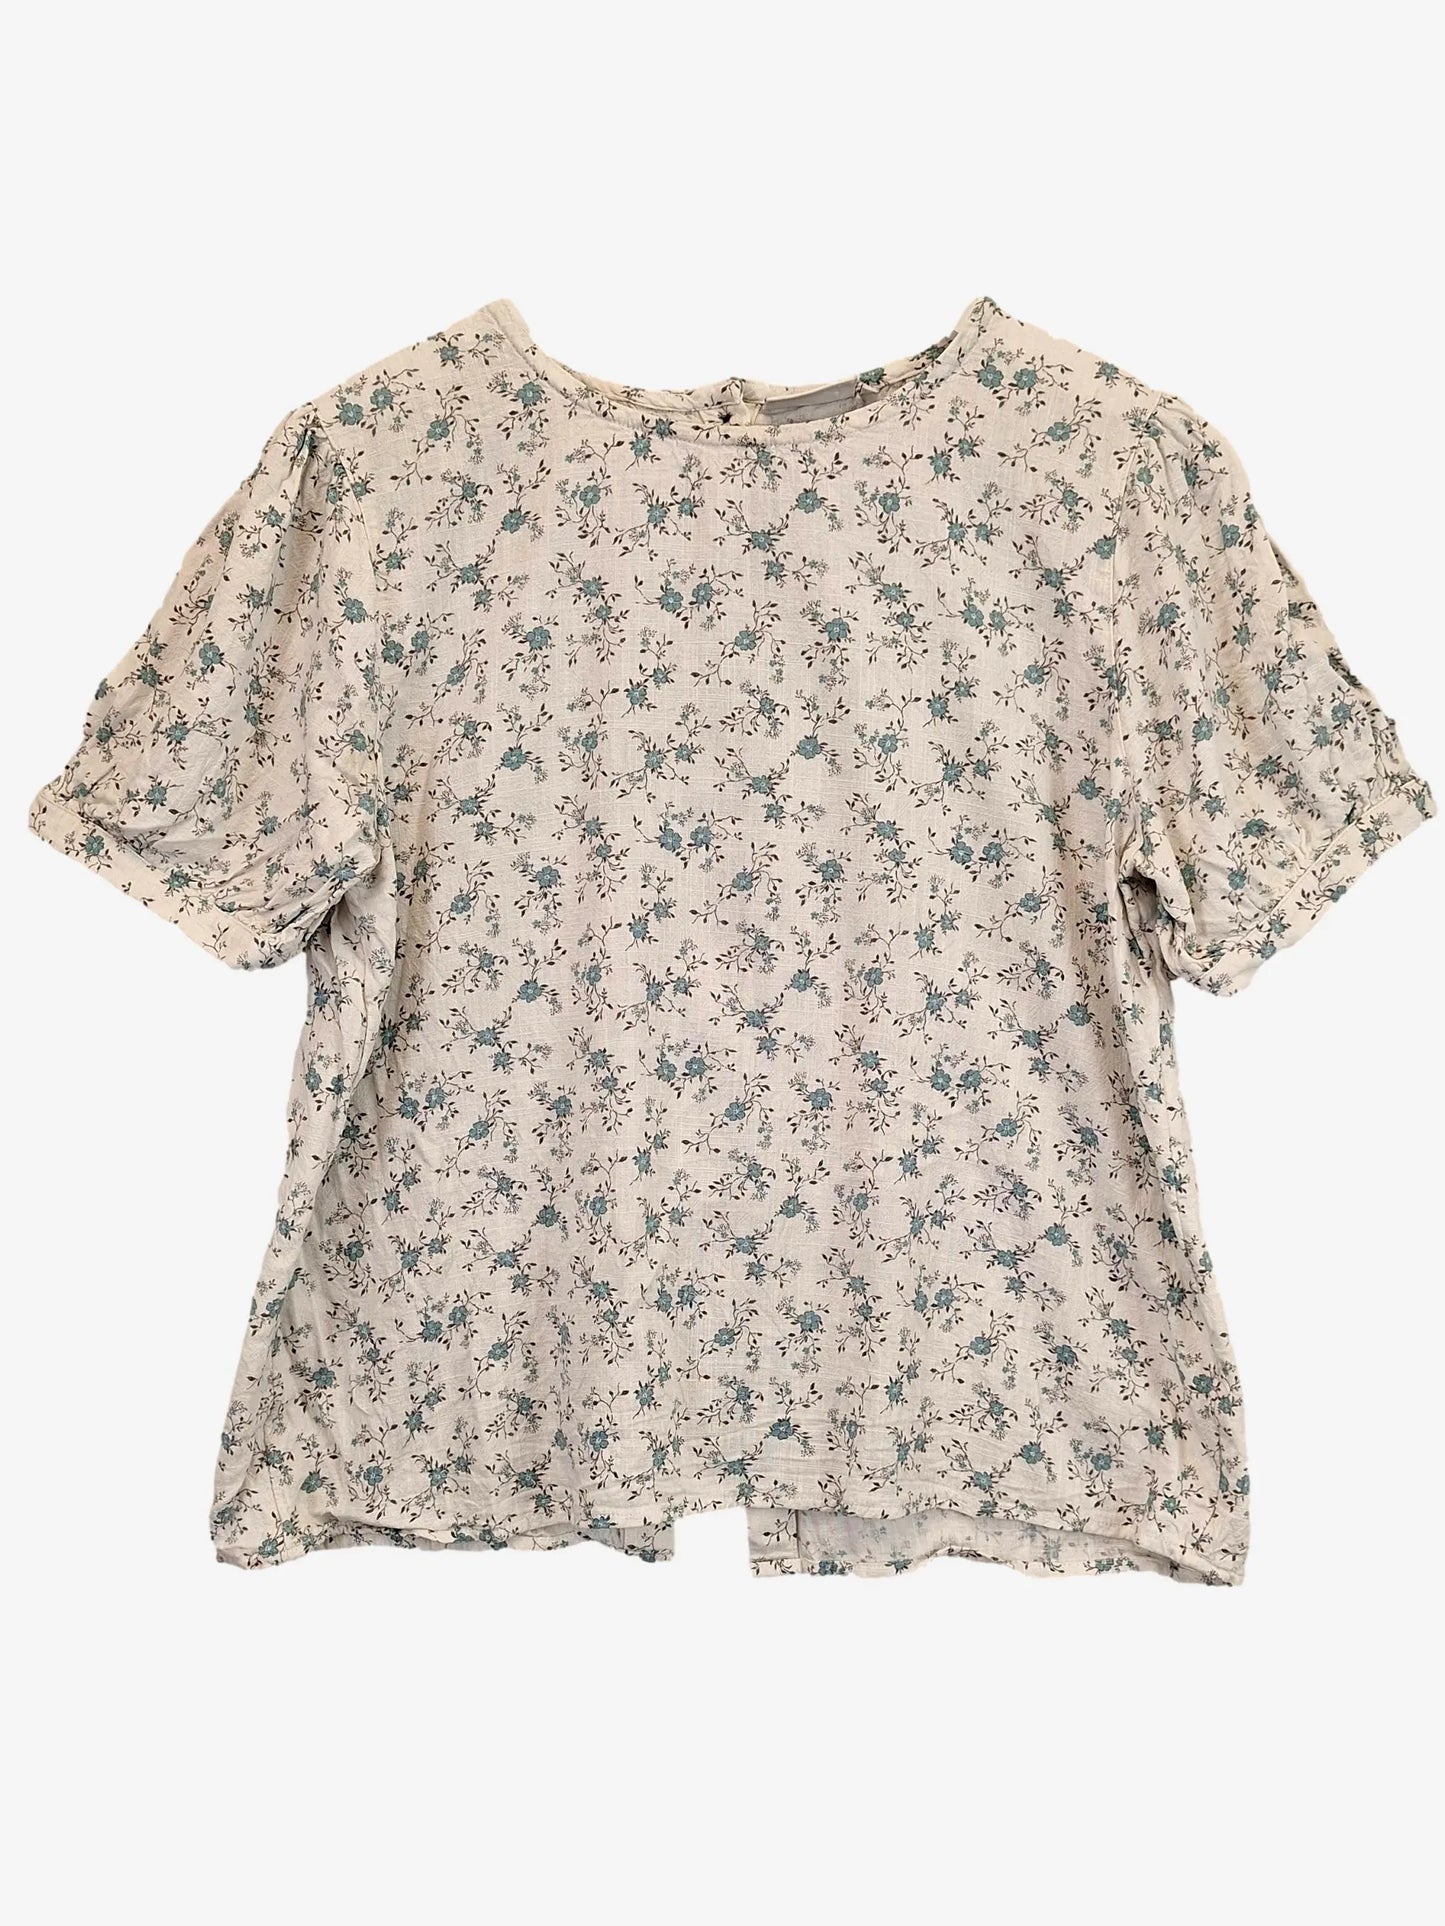 Jeanswest Vintage Floral Puff Sleeve Top Size 12 by SwapUp-Online Second Hand Store-Online Thrift Store